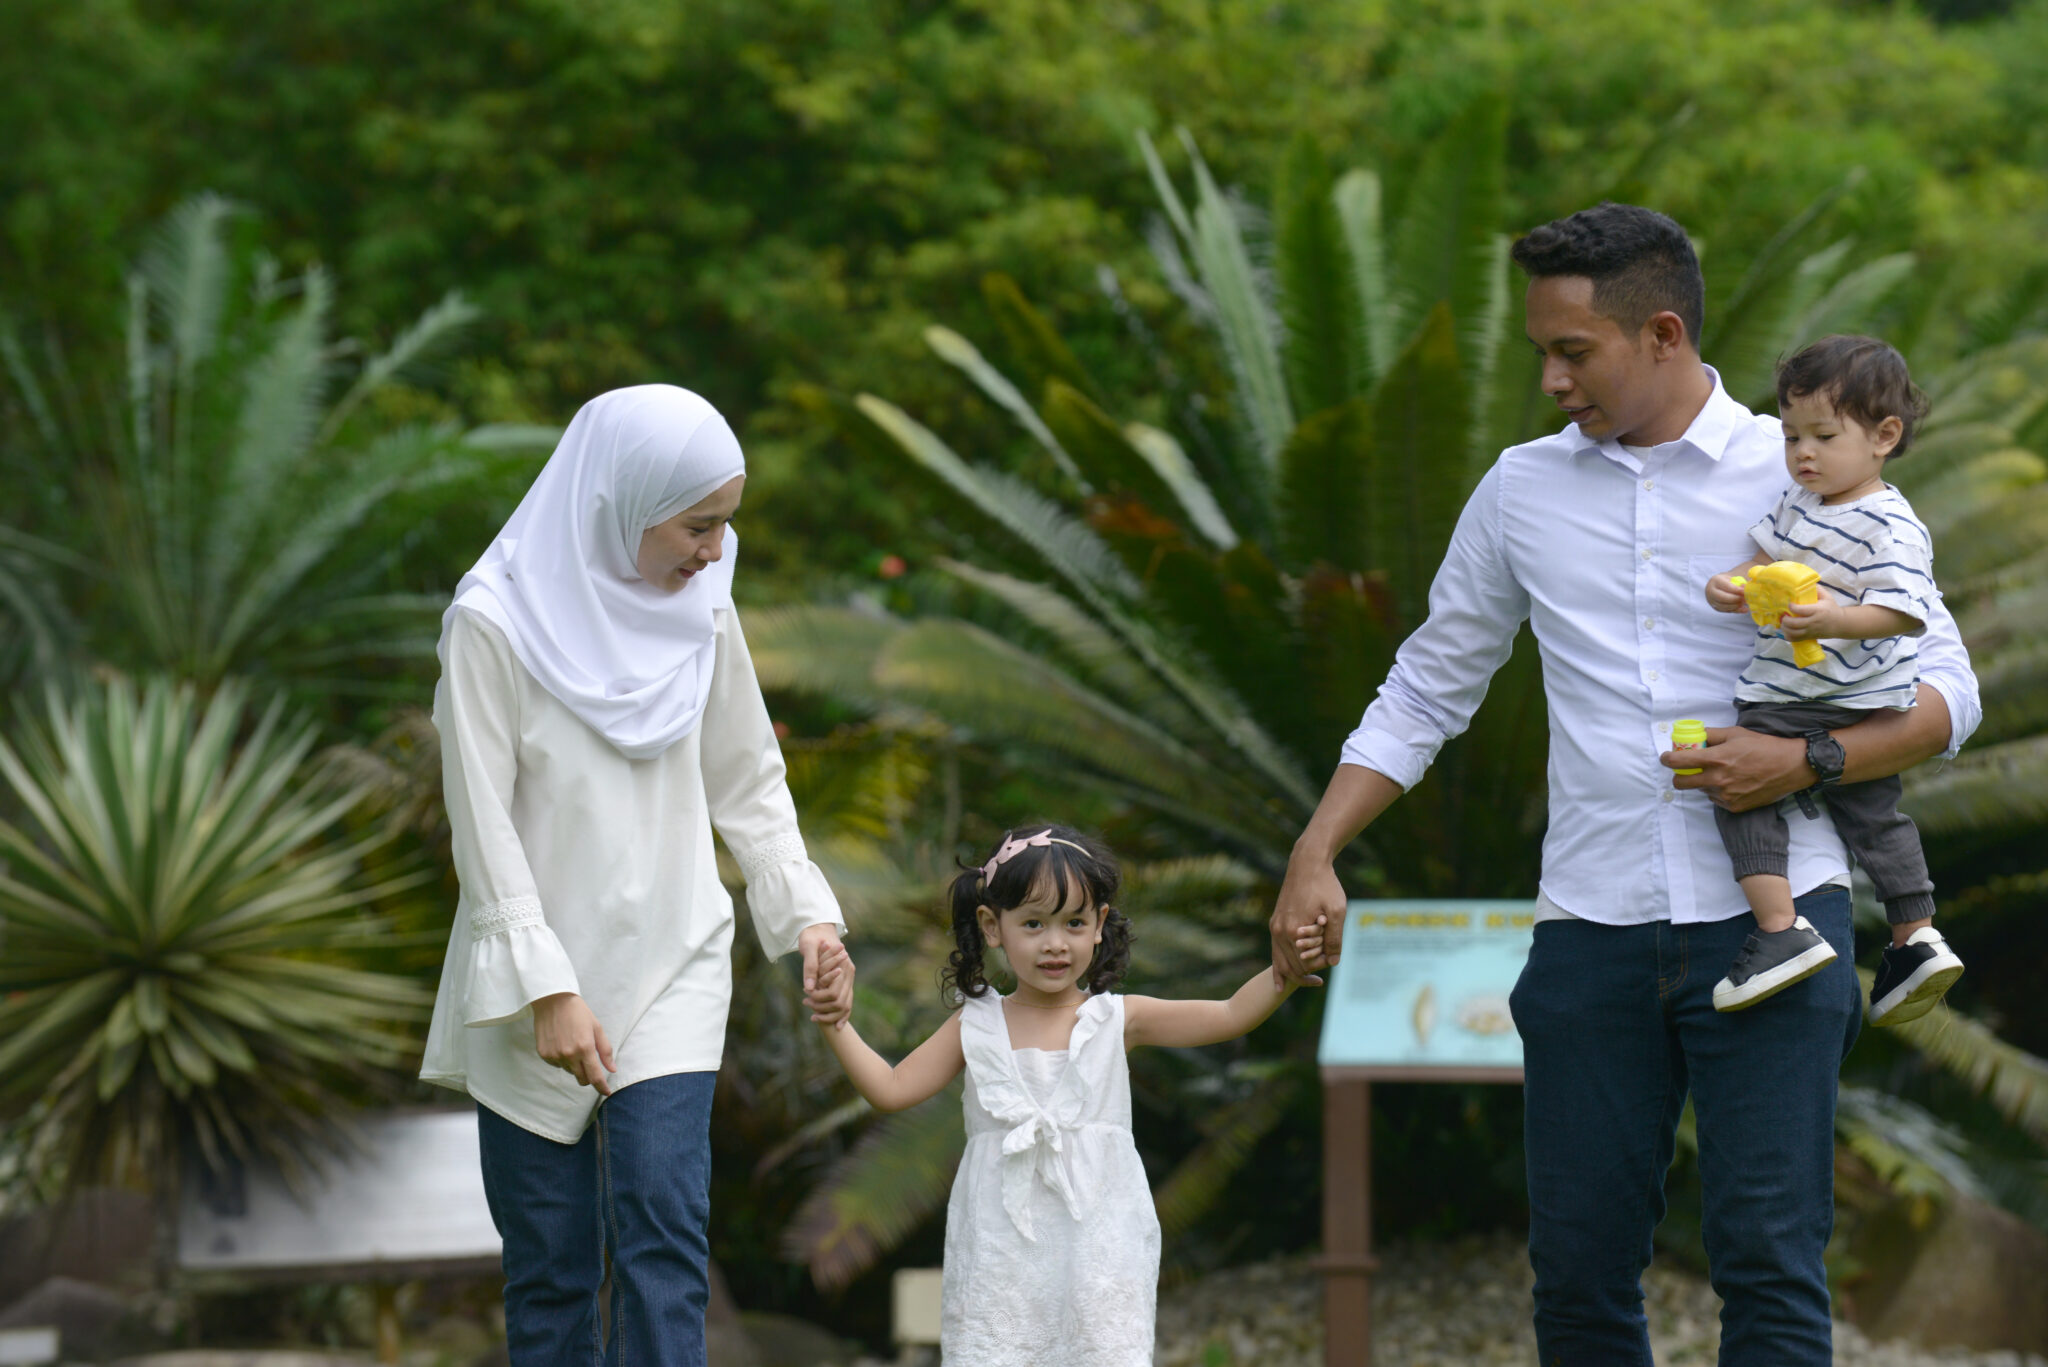 malay family enjoying quality time with father, son , mother and daughter in park